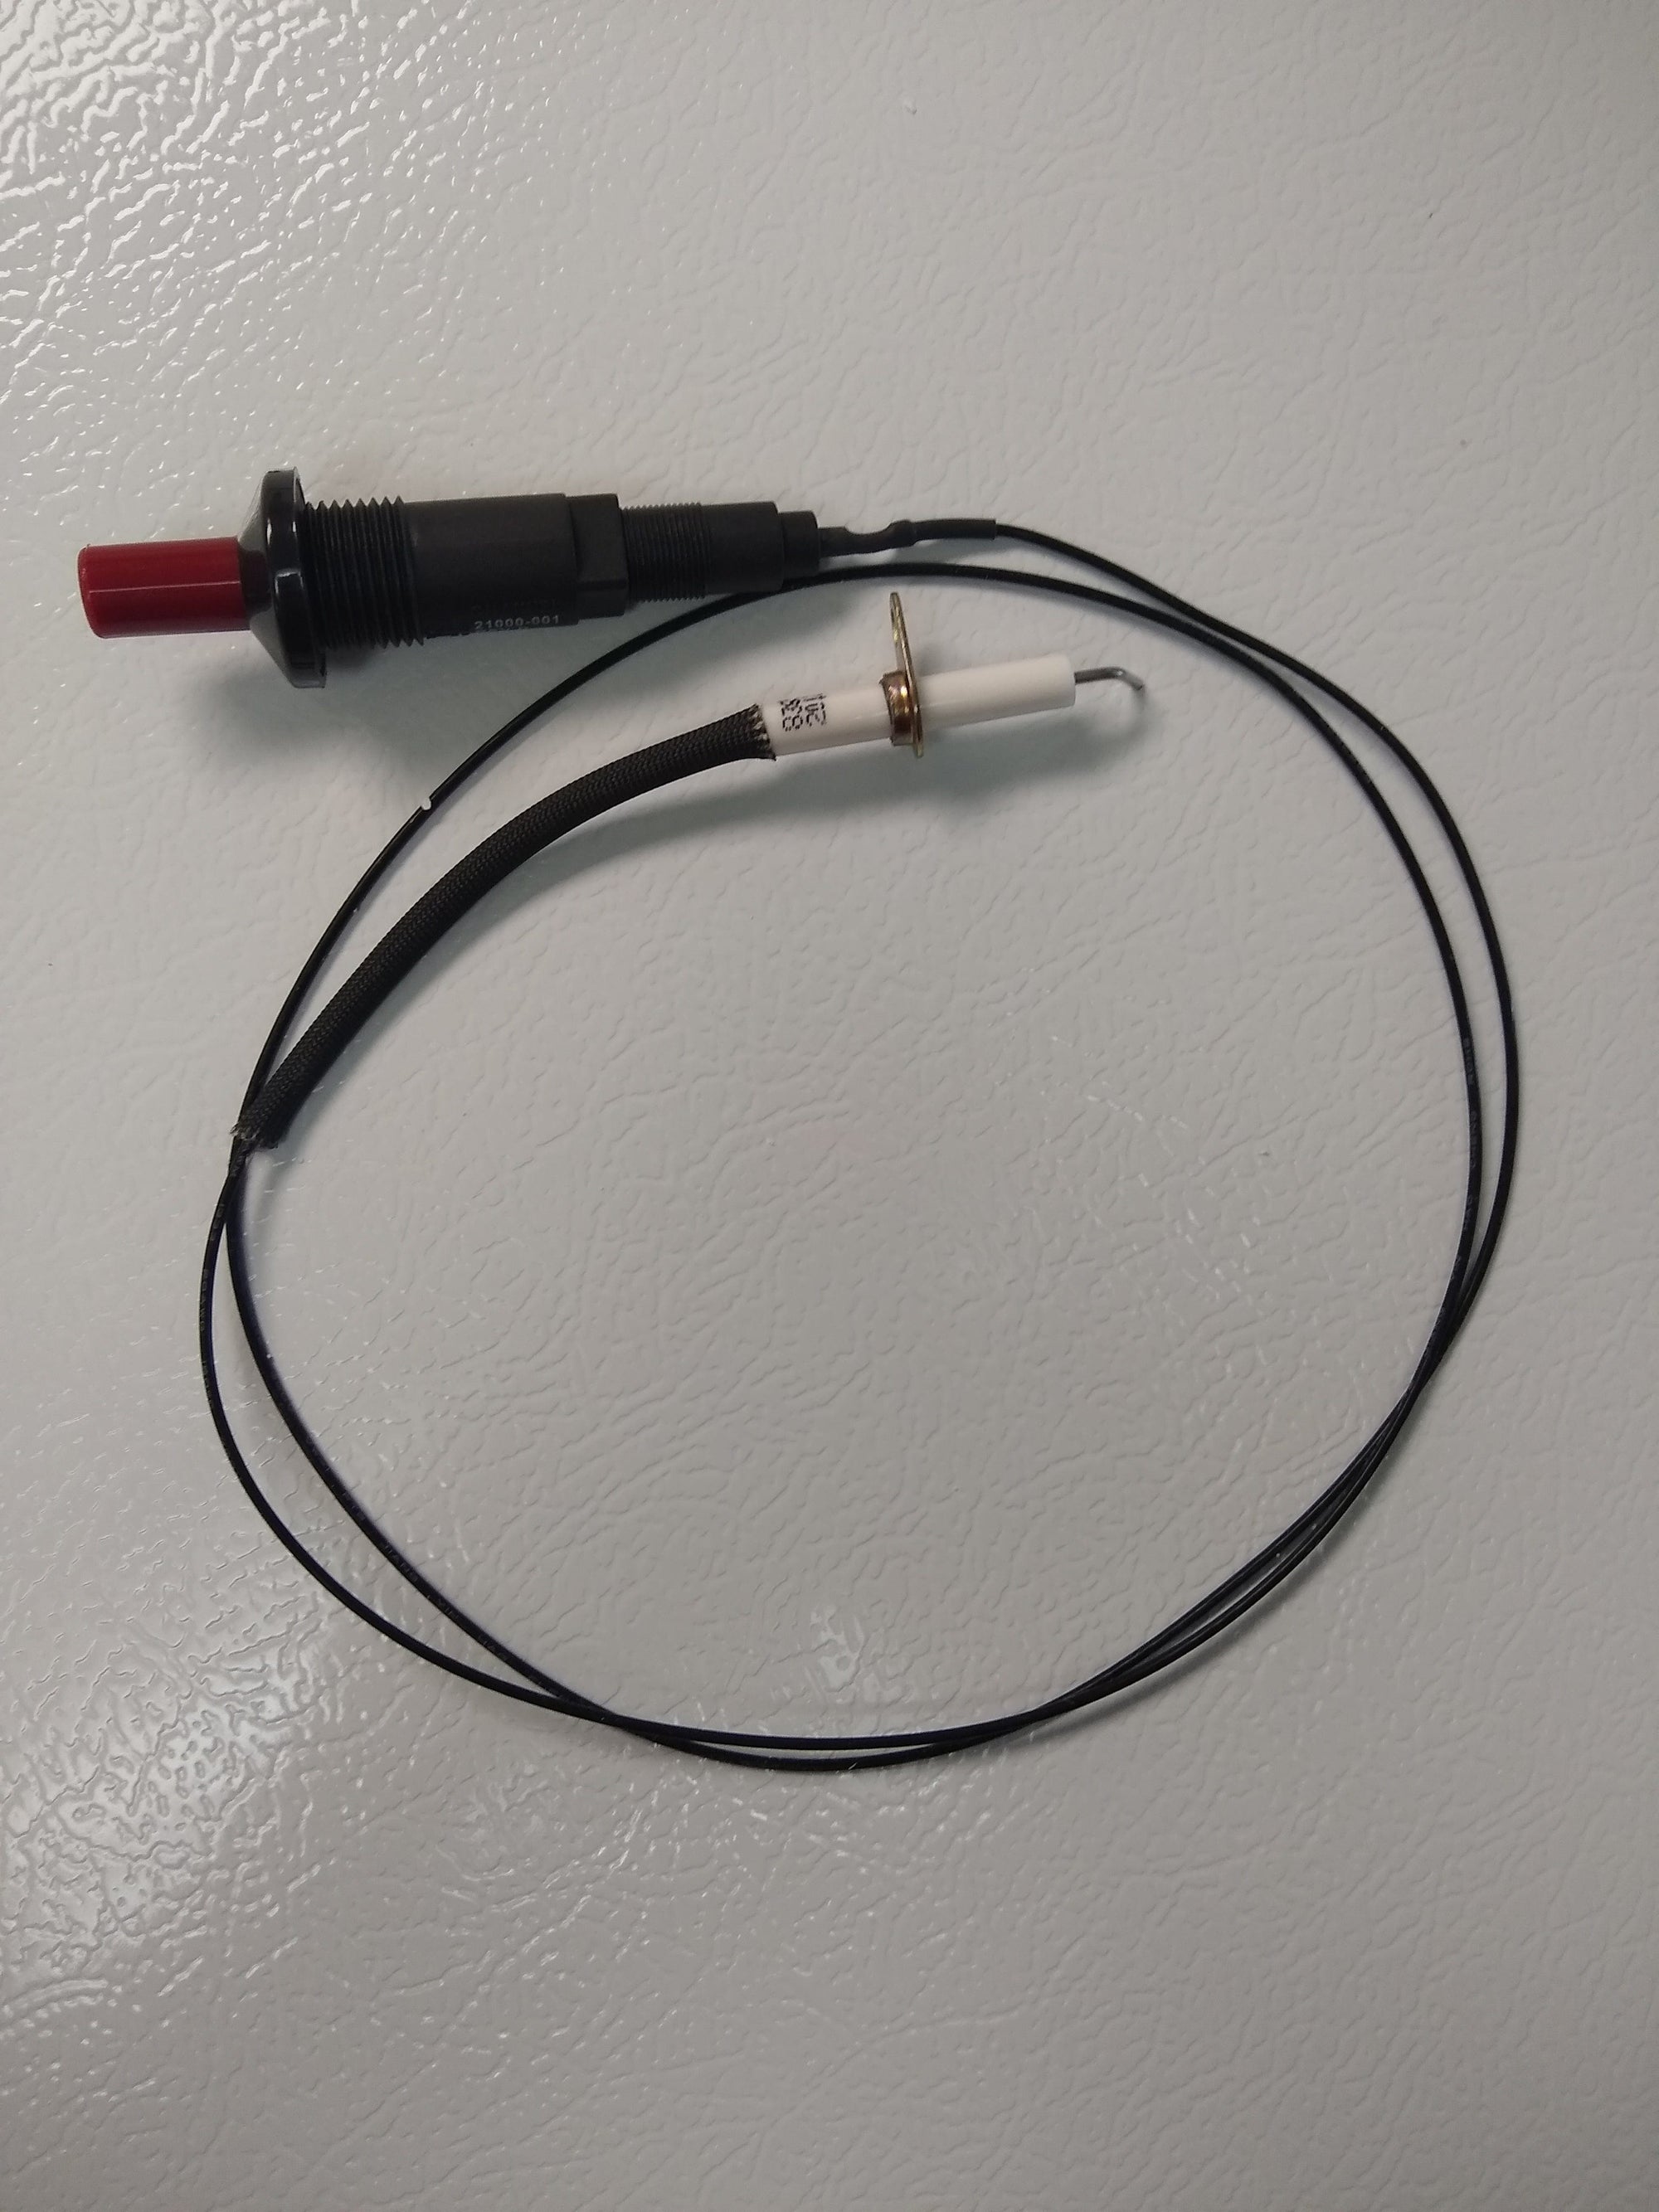 Crystal Cold Parts and Accessories Replacement Igniter for Crystal Cold Refrigerators and Freezers